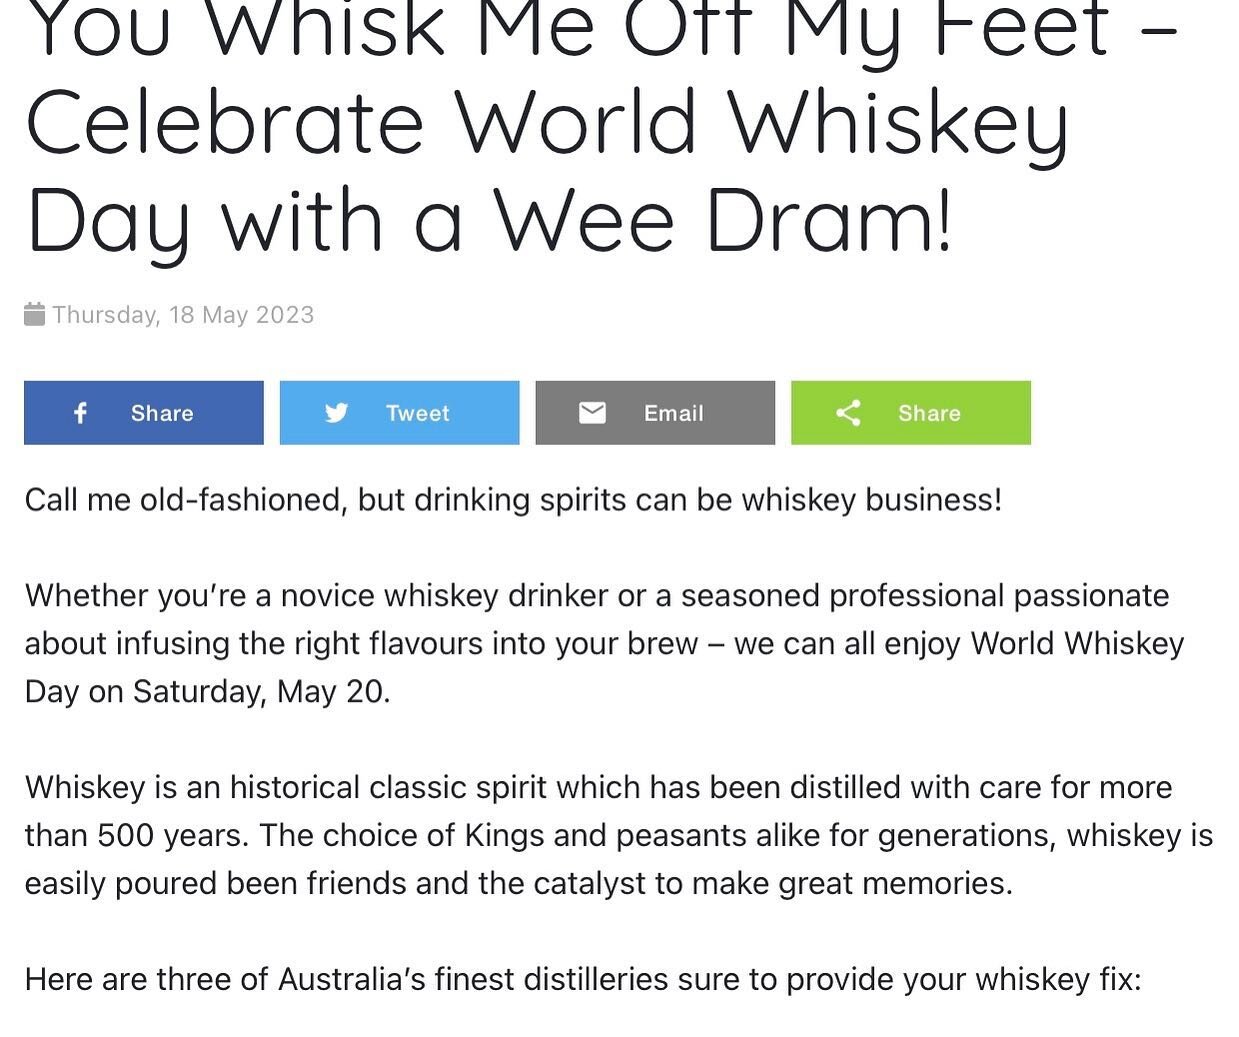 Fun little feature from the Australian Good Food Guide this morning! Give it a read and visit our profile on their website! #AGFG  #AGFGrecommended  https://www.agfg.com.au/article/you-whisk-me-off-my-feet-celebrate-world-whiskey-day-with-a-wee-dram